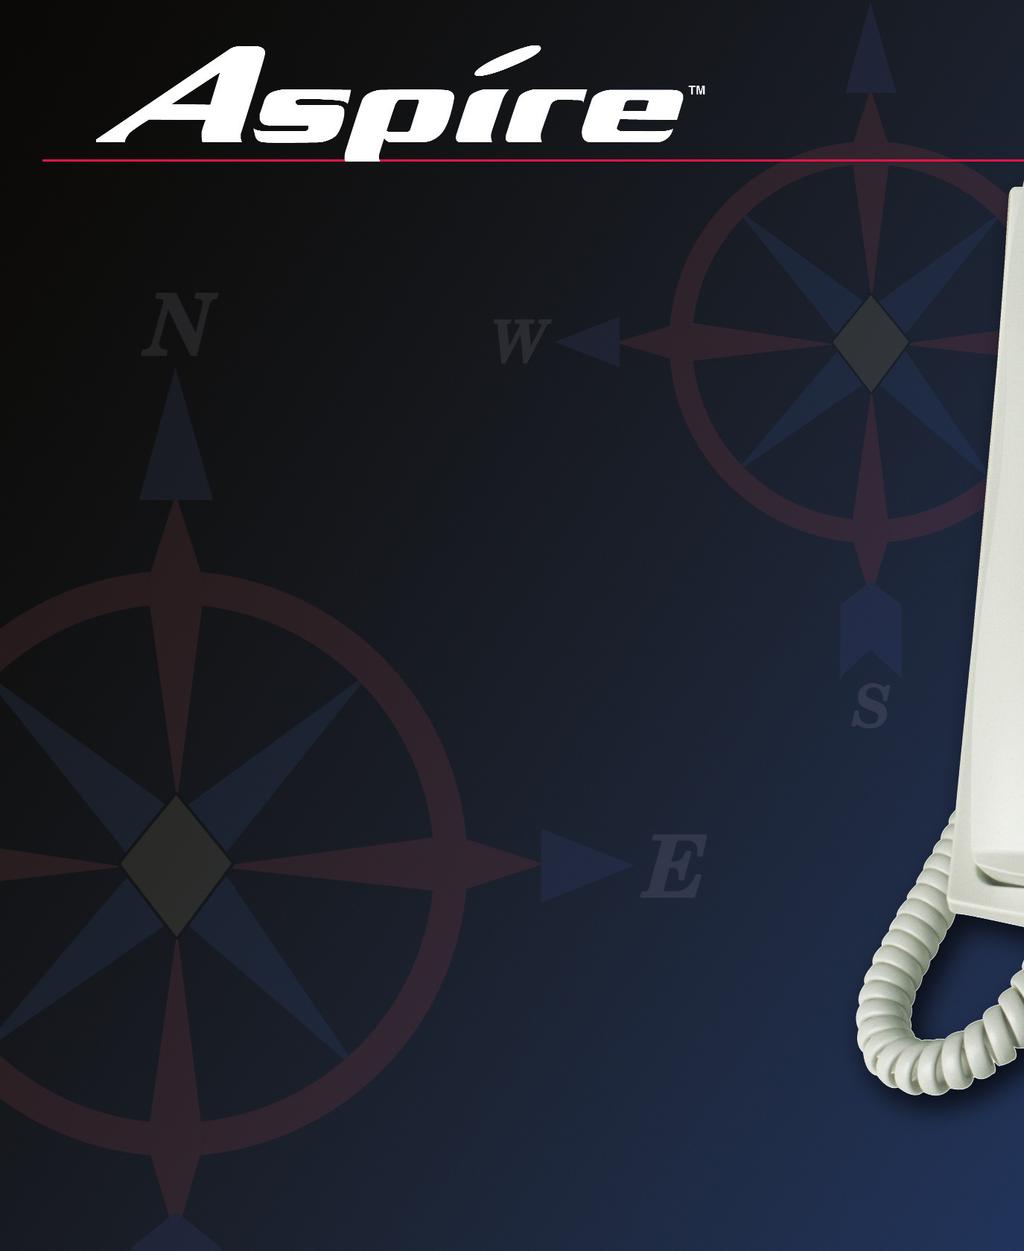 Aspire s elegant sophisticated design delivers productivity and versatility to your work environment. Aspire s Voice over IP (VoIP) allows you to place voice calls over a data network.